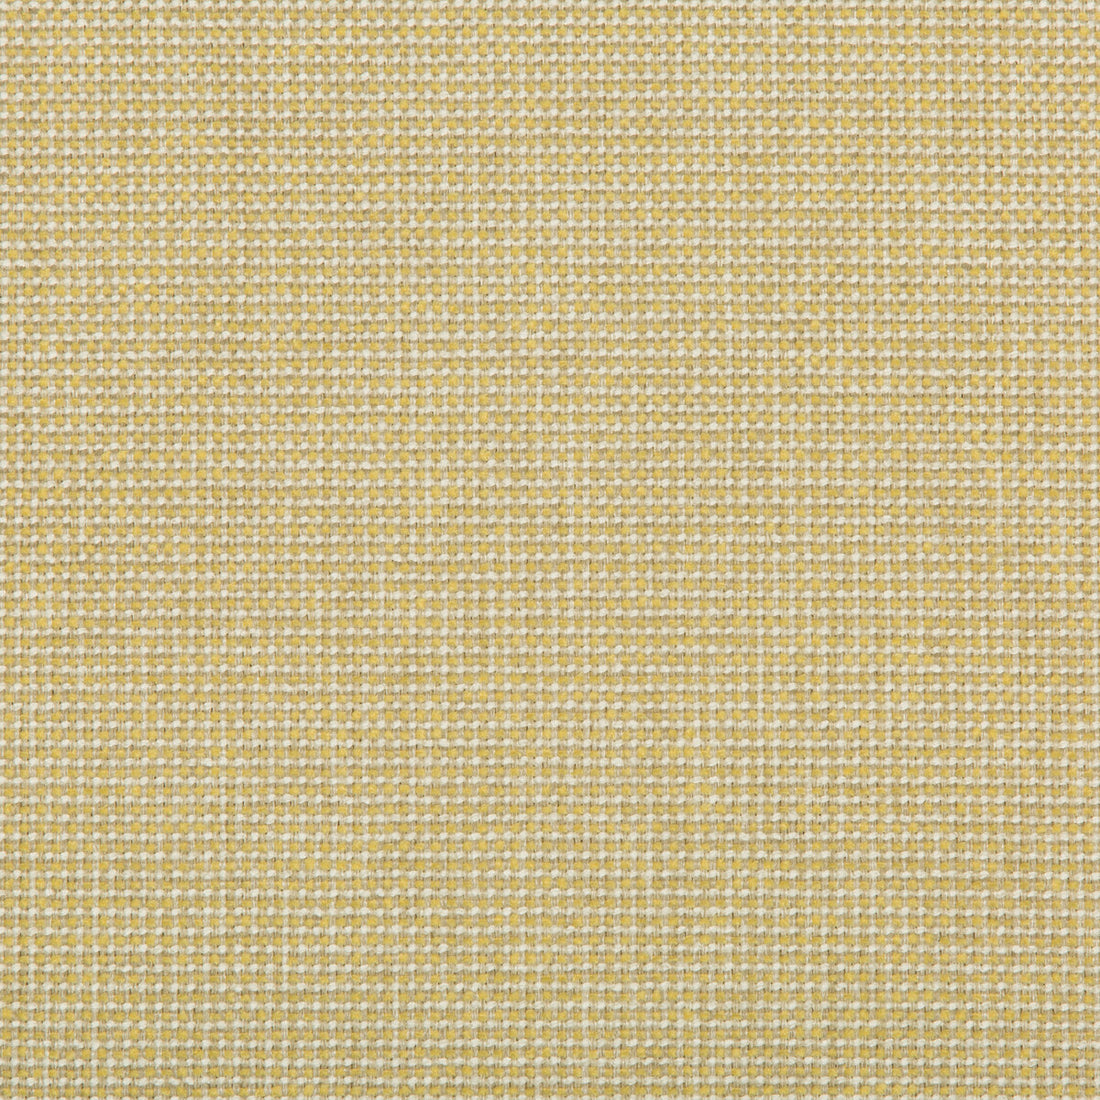 Burr fabric in lemon drop color - pattern 35745.14.0 - by Kravet Contract in the Value Kravetarmor collection